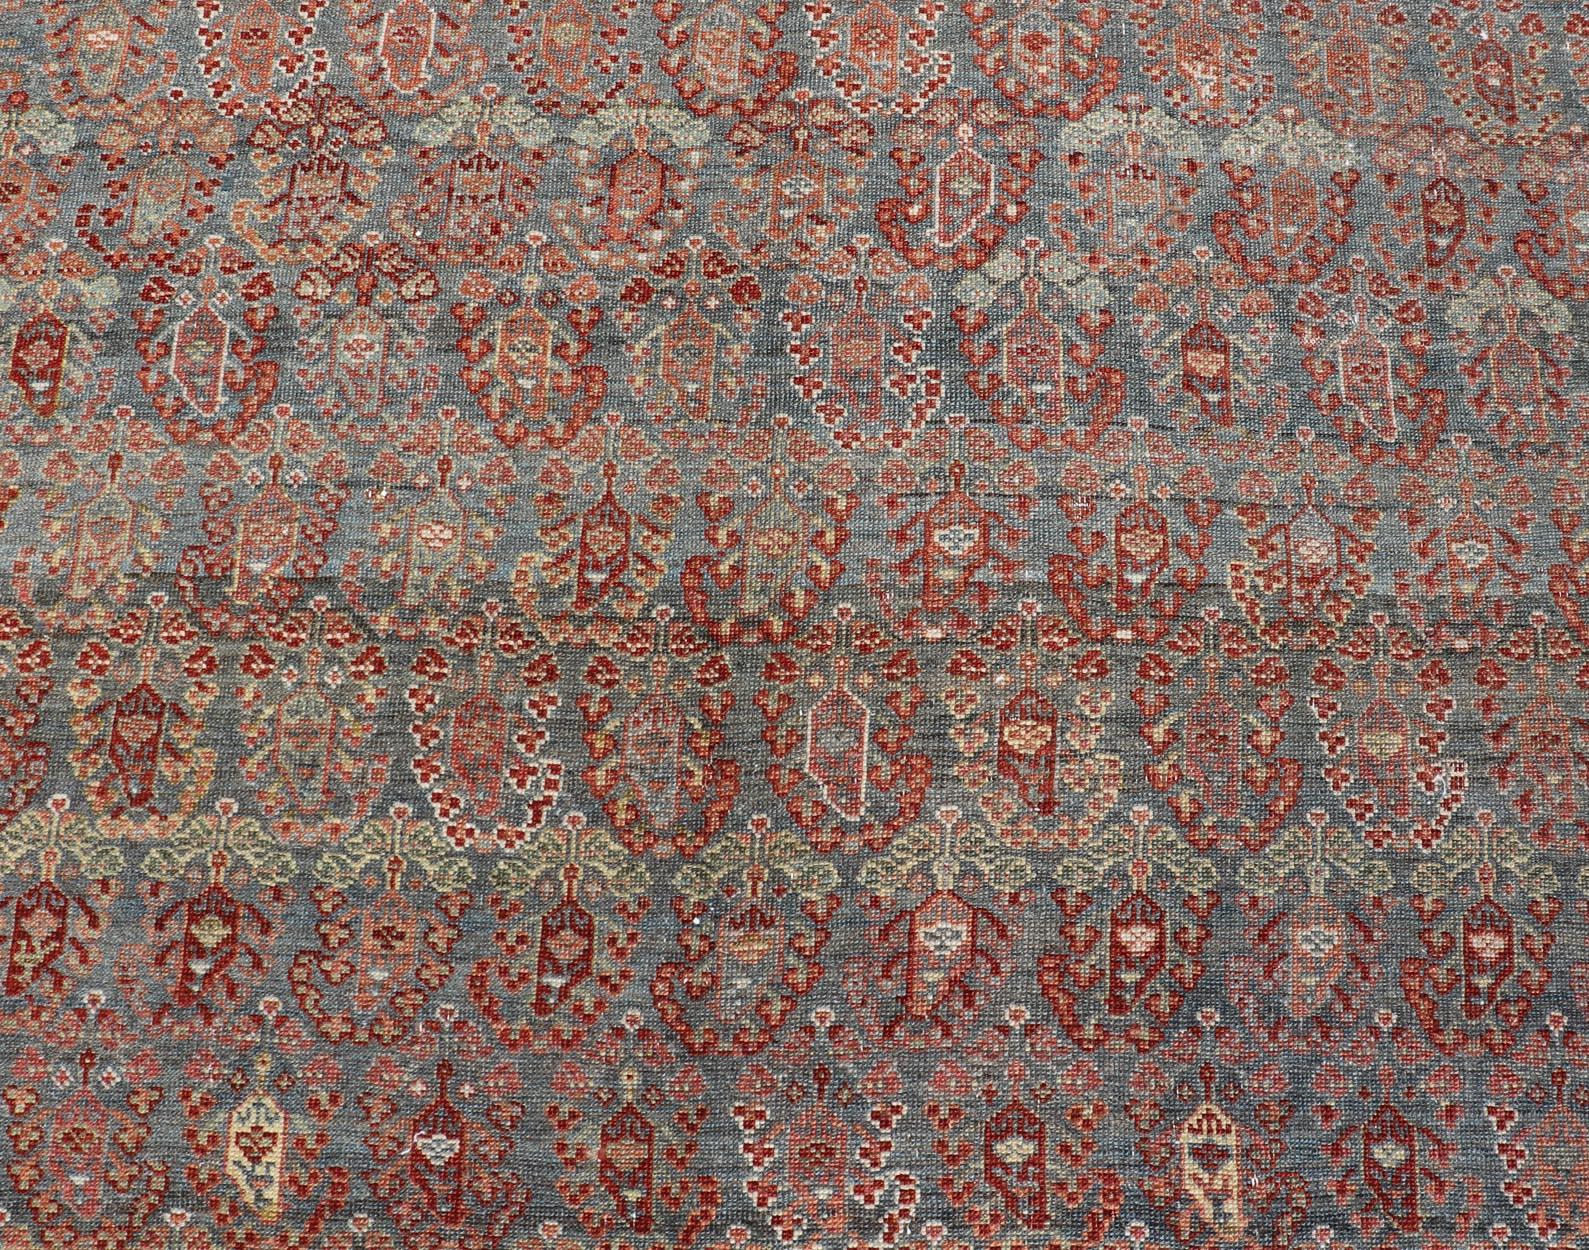  19th century Antique Feraghan Gallery Persian Rug With All-Over Paisley Geometric Design. Keivan Woven Arts / rug 19-0503, country of origin / type: Iran /  Feraghan, circa 1890 

Measures: 7'4 x 17'0 

Set on Steel blue background and light